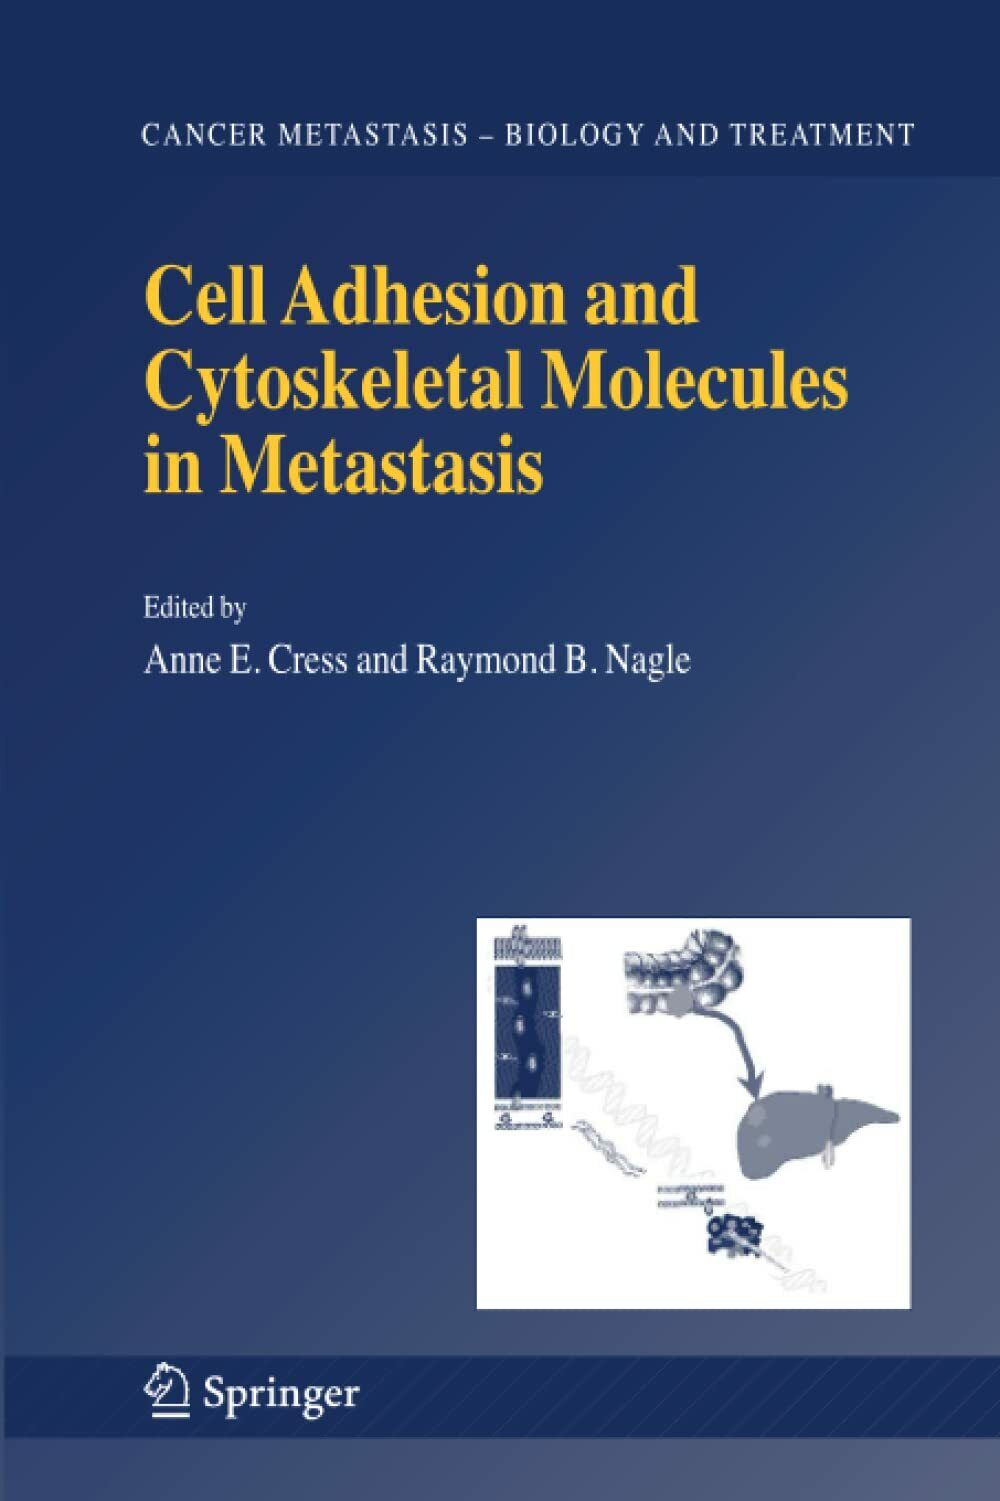 Cell Adhesion and Cytoskeletal Molecules in Metastasis - Springer, 2010